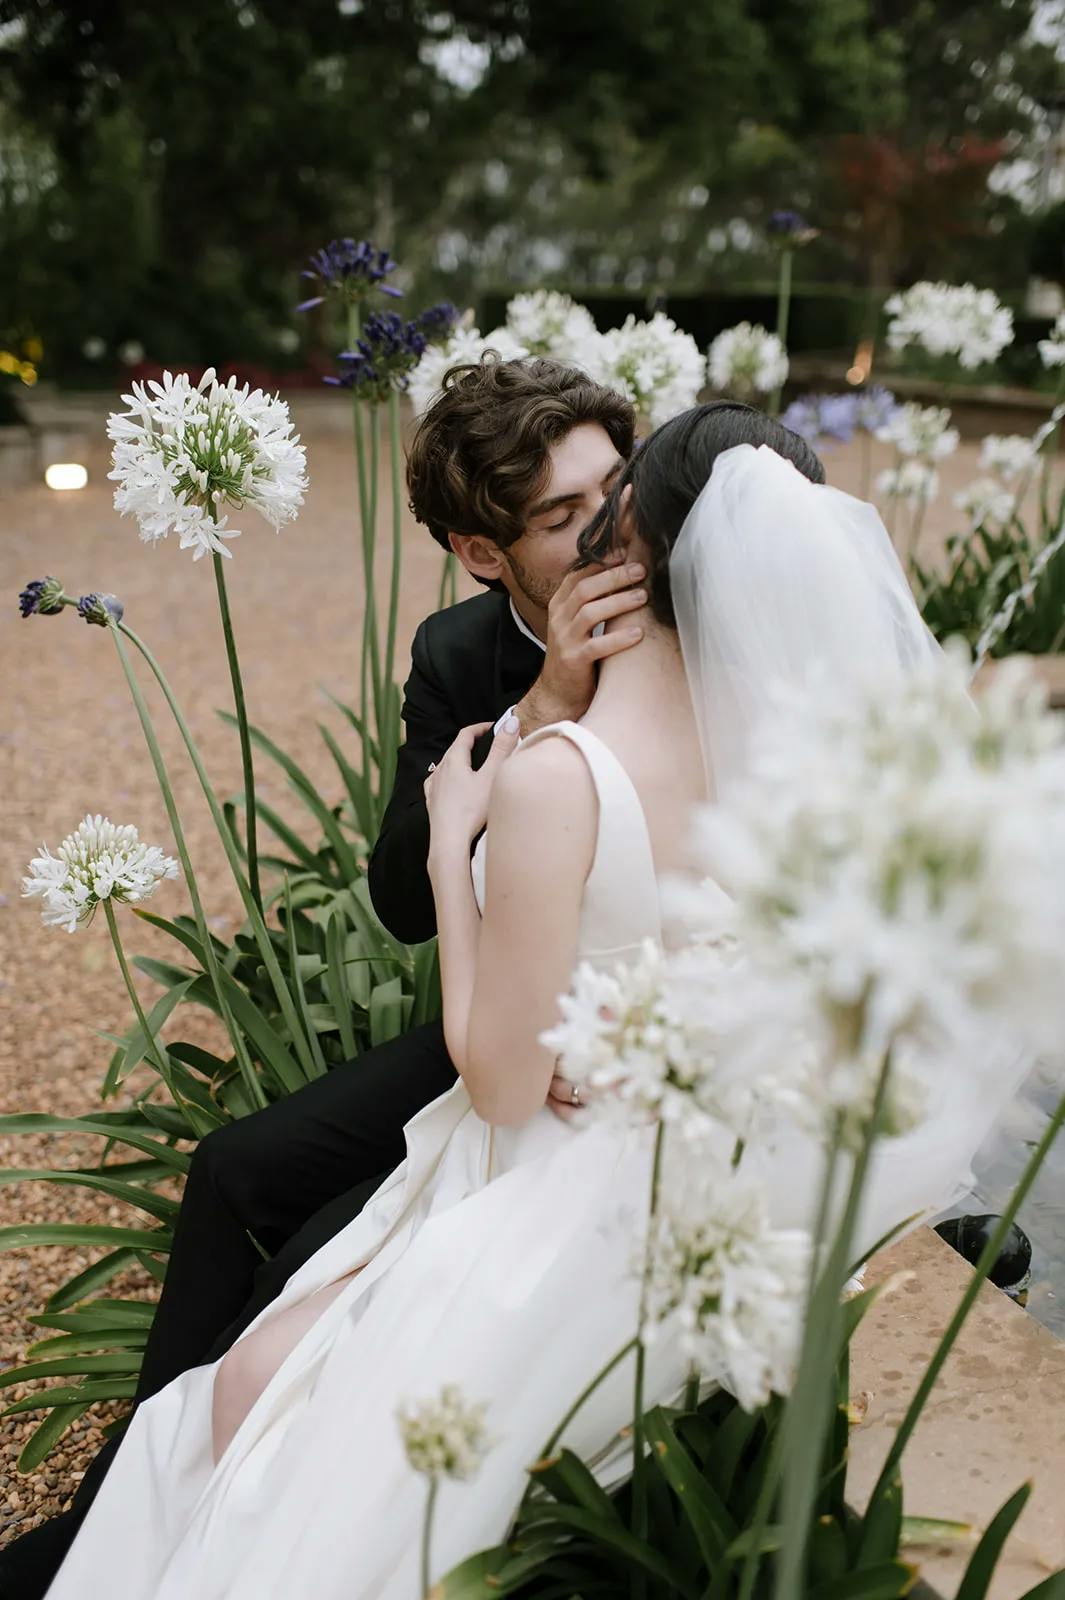 A newly married couple embraces and shares a kiss in a garden, surrounded by white flowers. The groom is dressed in a black suit and the bride is in a white wedding dress with a veil. They are sitting on a stone path, creating a romantic and intimate atmosphere.